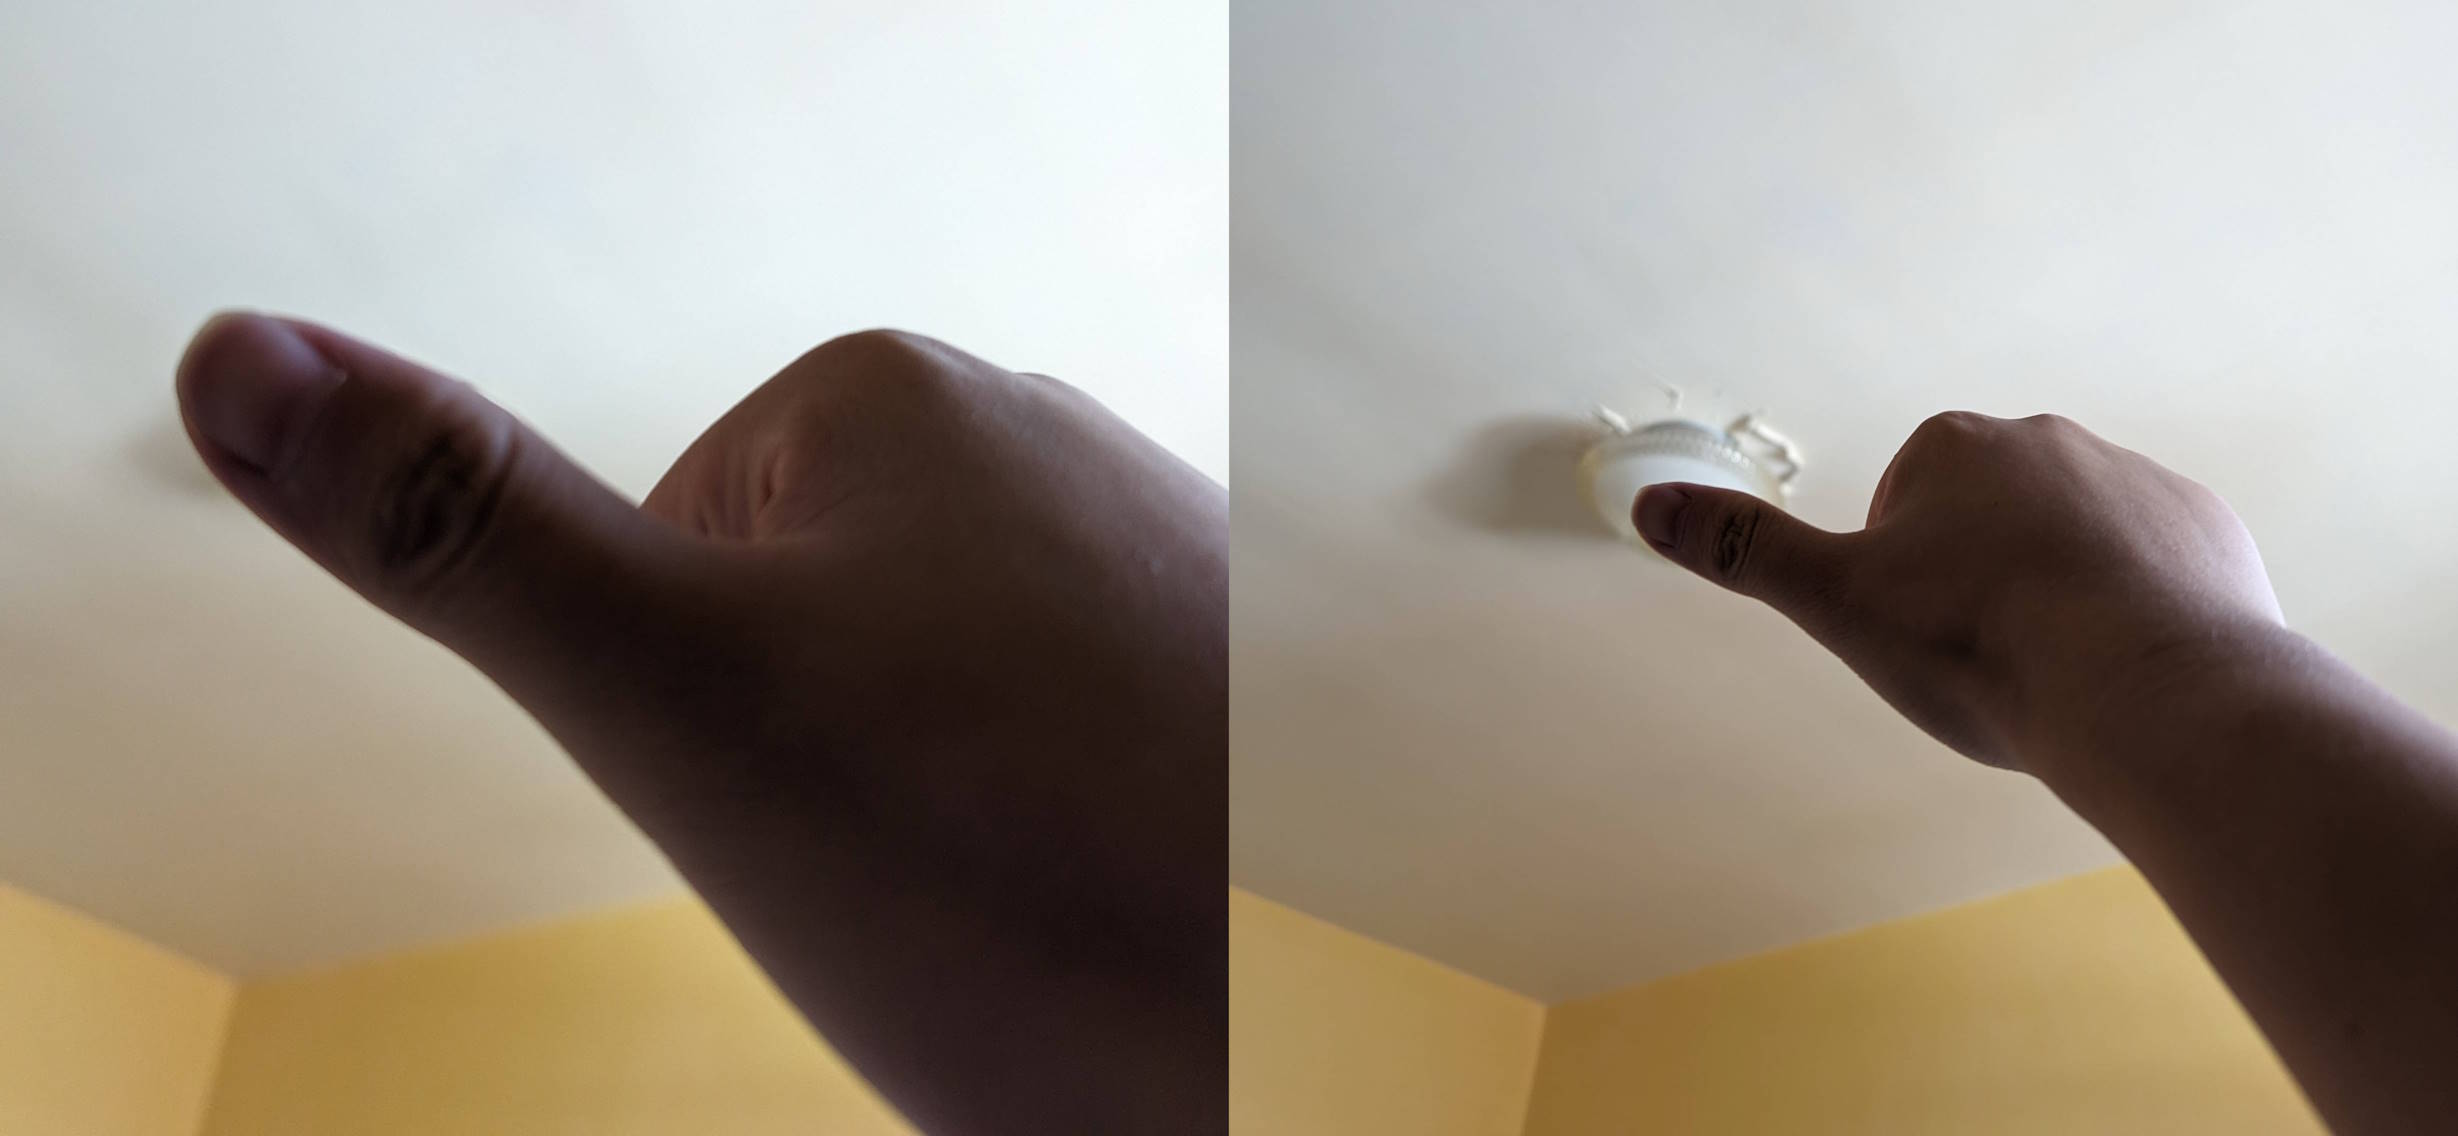 Two side-by-side images of a thumb blocking a lamp. The first image has the thumb covering it up because the thumb is nearby. The second image has the thumb incompletely covering it up because the thumb is farther away.